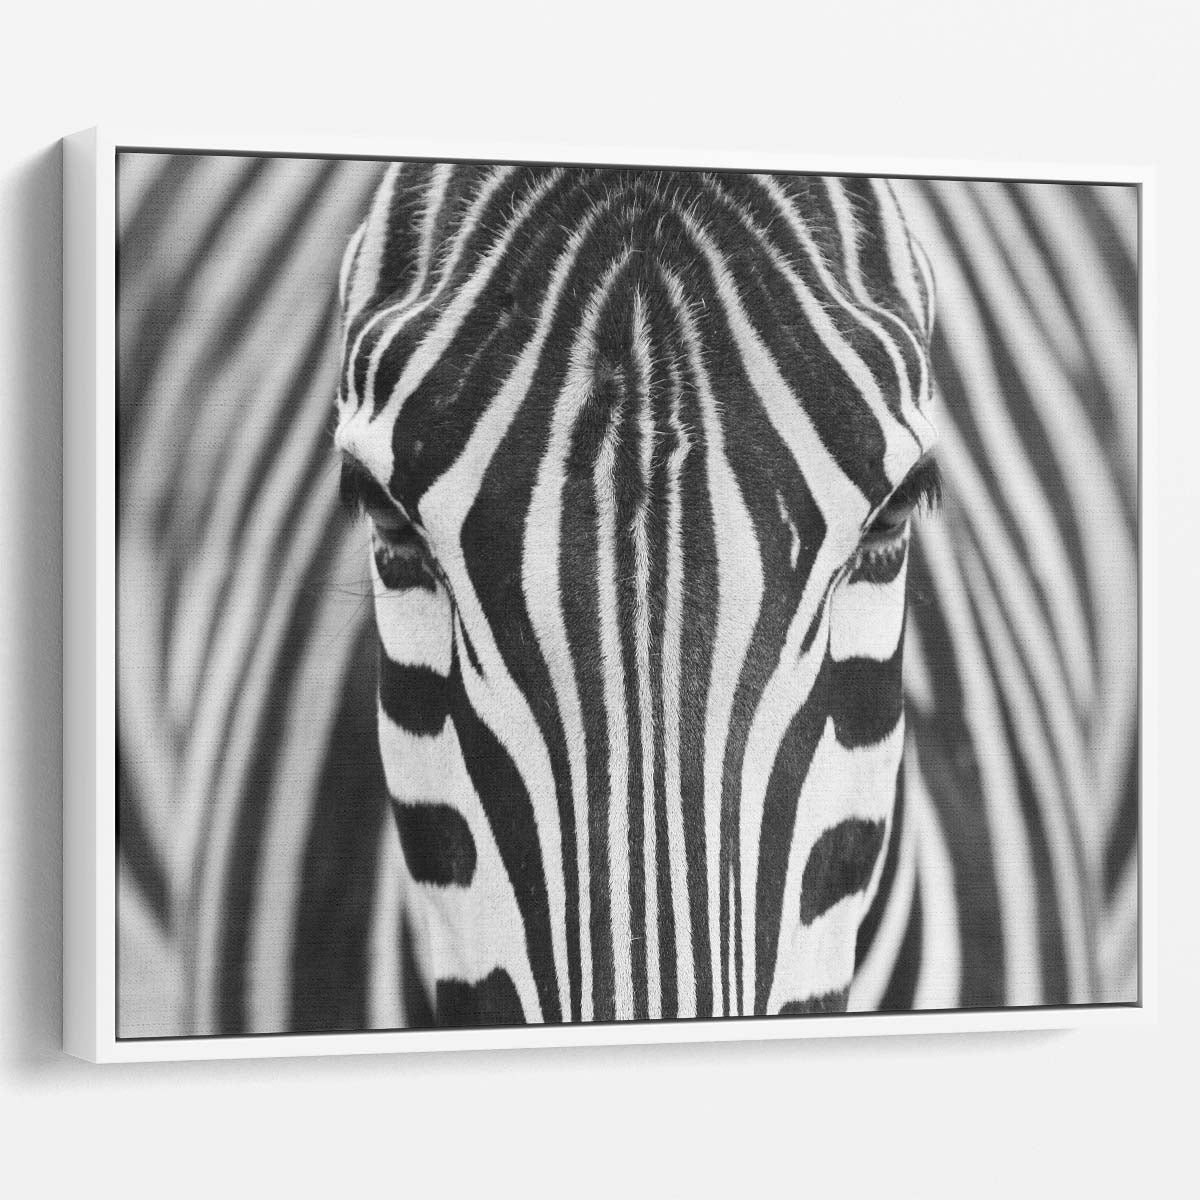 Monochrome Zebra Stripes Abstract Wildlife Wall Art by Luxuriance Designs. Made in USA.